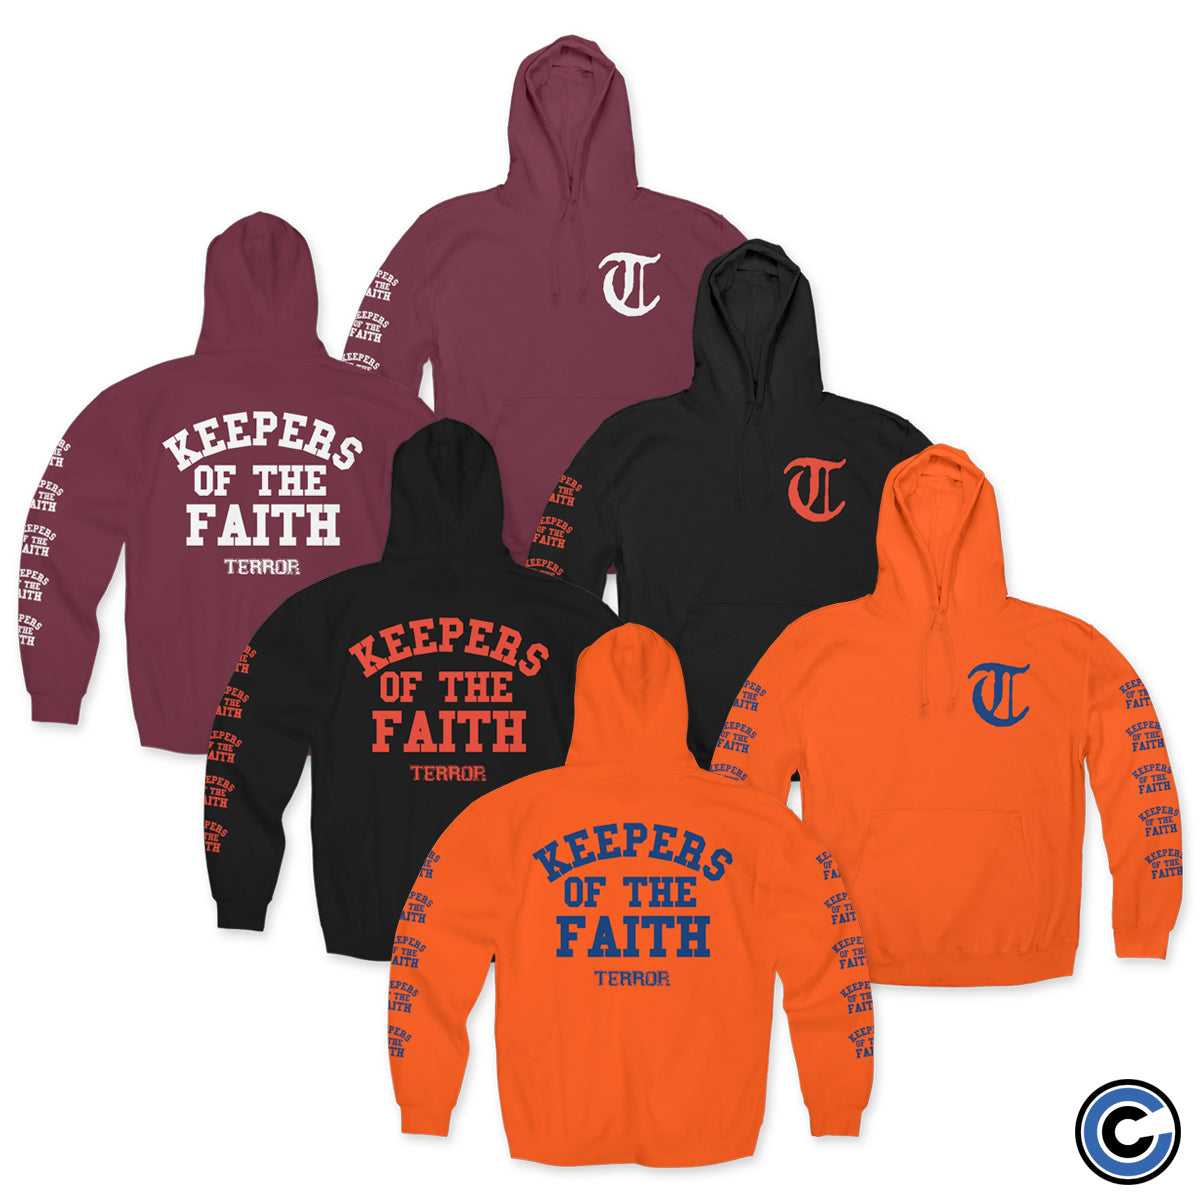 Terror "Keepers Of The Faith" Hoodie